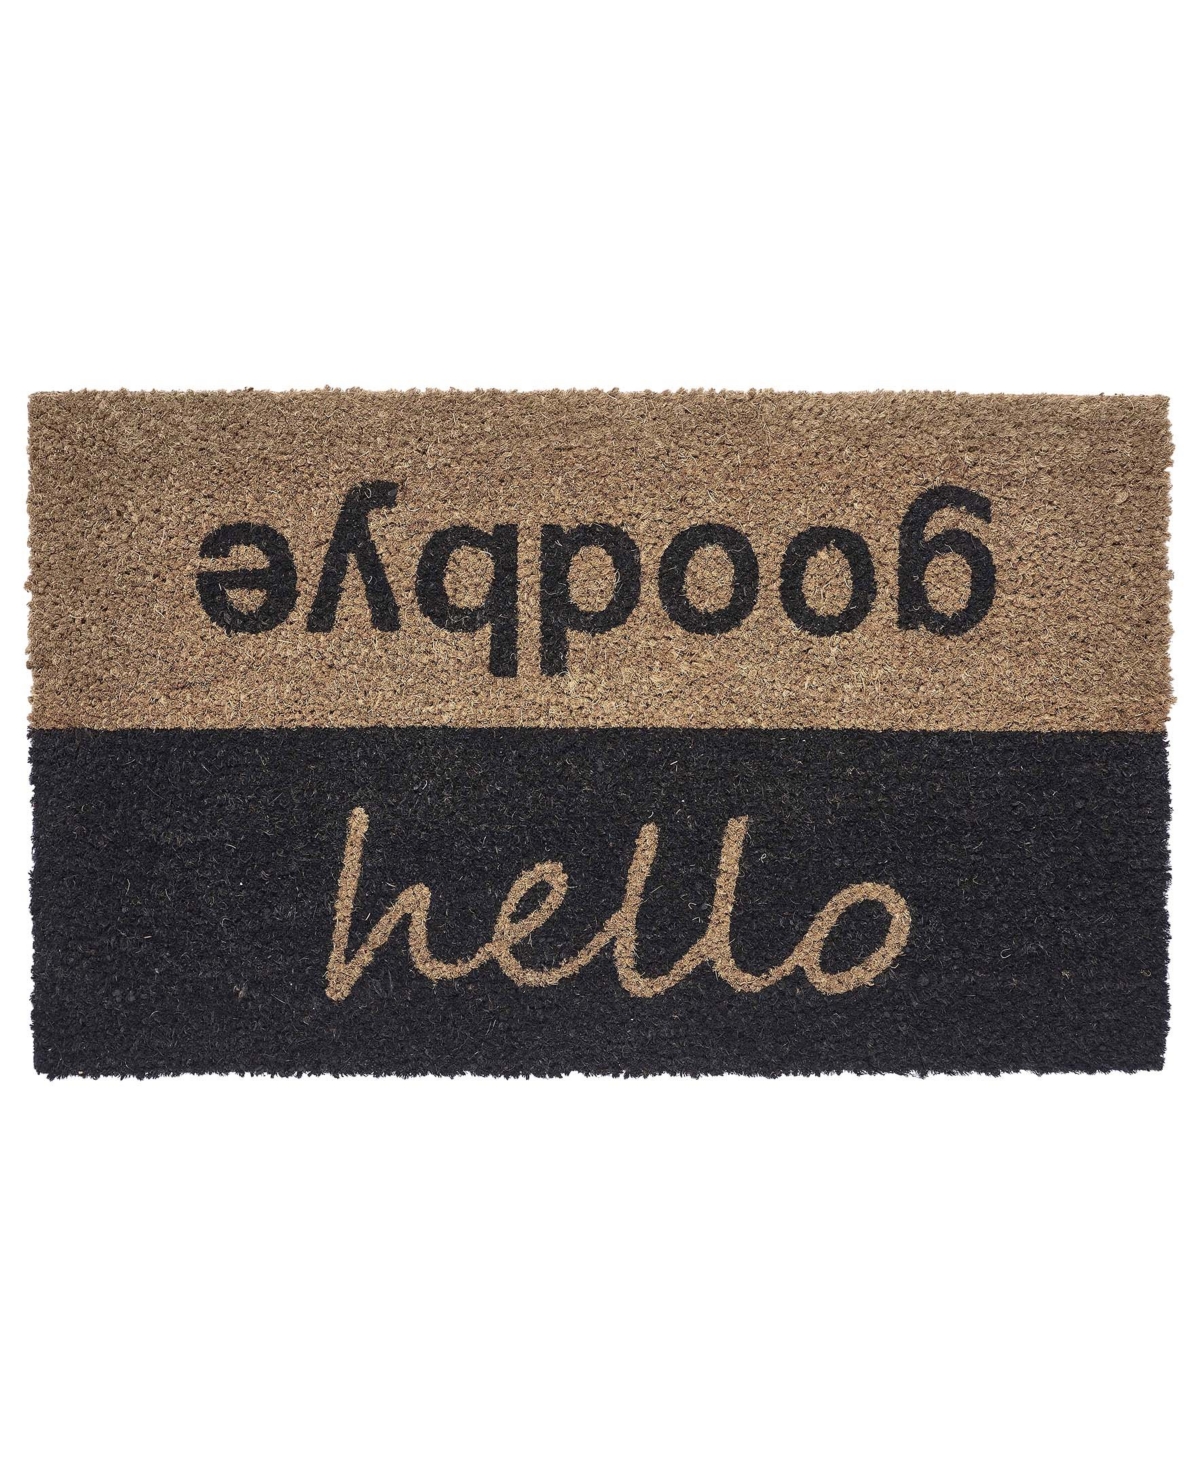 18" x 30" Seventh Studio Coir Door Mats: Hello/Goodbye or Welcome $11.95 at Macy's w/ Free Store Pickup or Free S&H on $25+